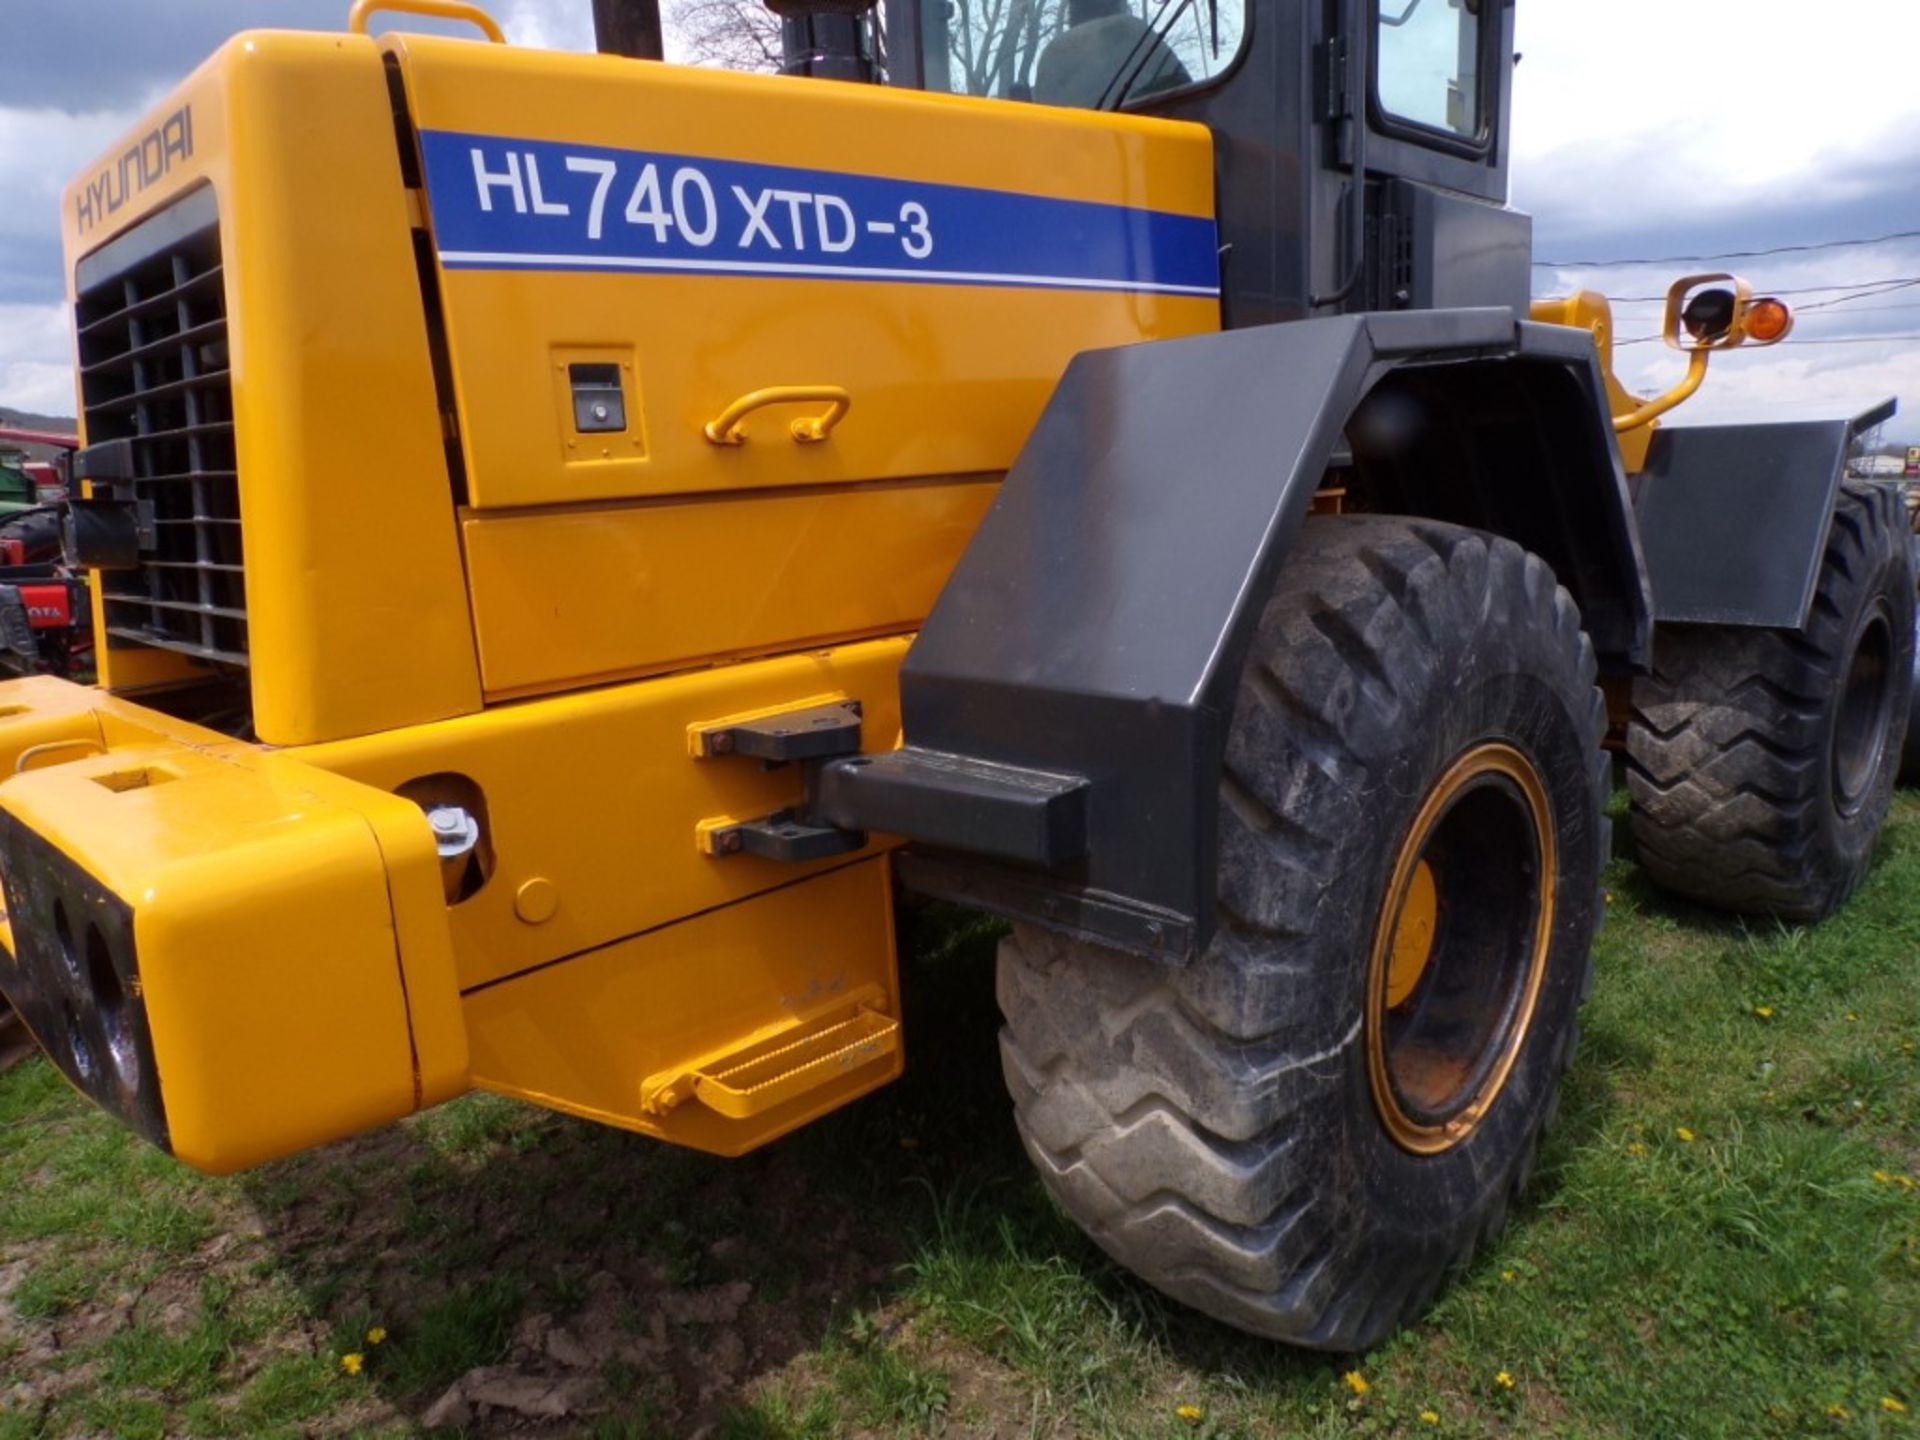 Hyndai HL-740XTD-3 4 WD Loader with JRB Hydraulic Quik Coupler, 2 1/2 Yard Bucket, 20.5-25 Tires, - Image 6 of 6